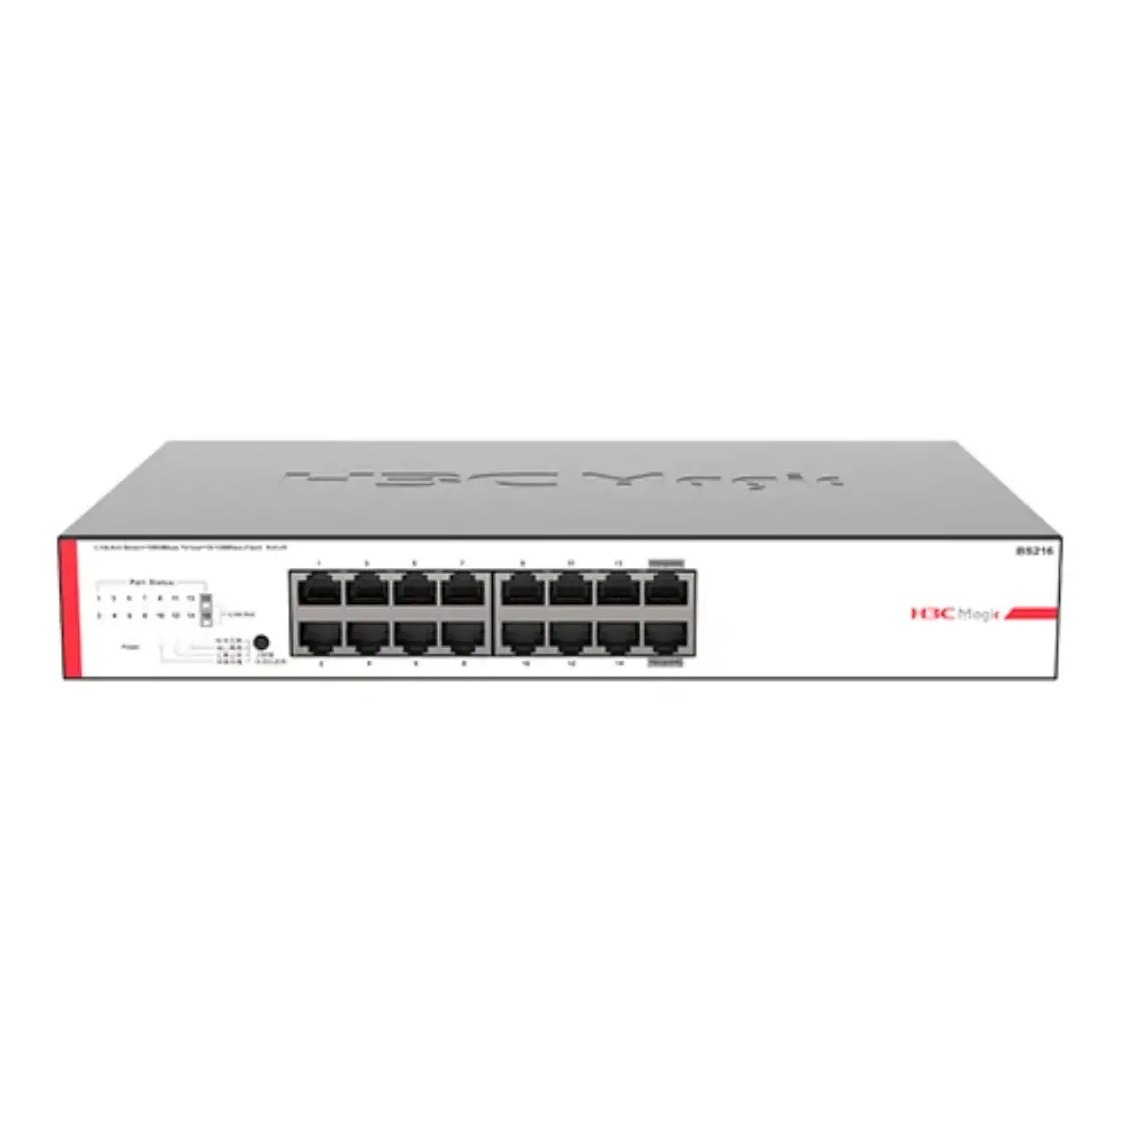 H3C Magic BS216 (9801A5AW), 16 Port Giga Layer 2 Unmanaged Switch